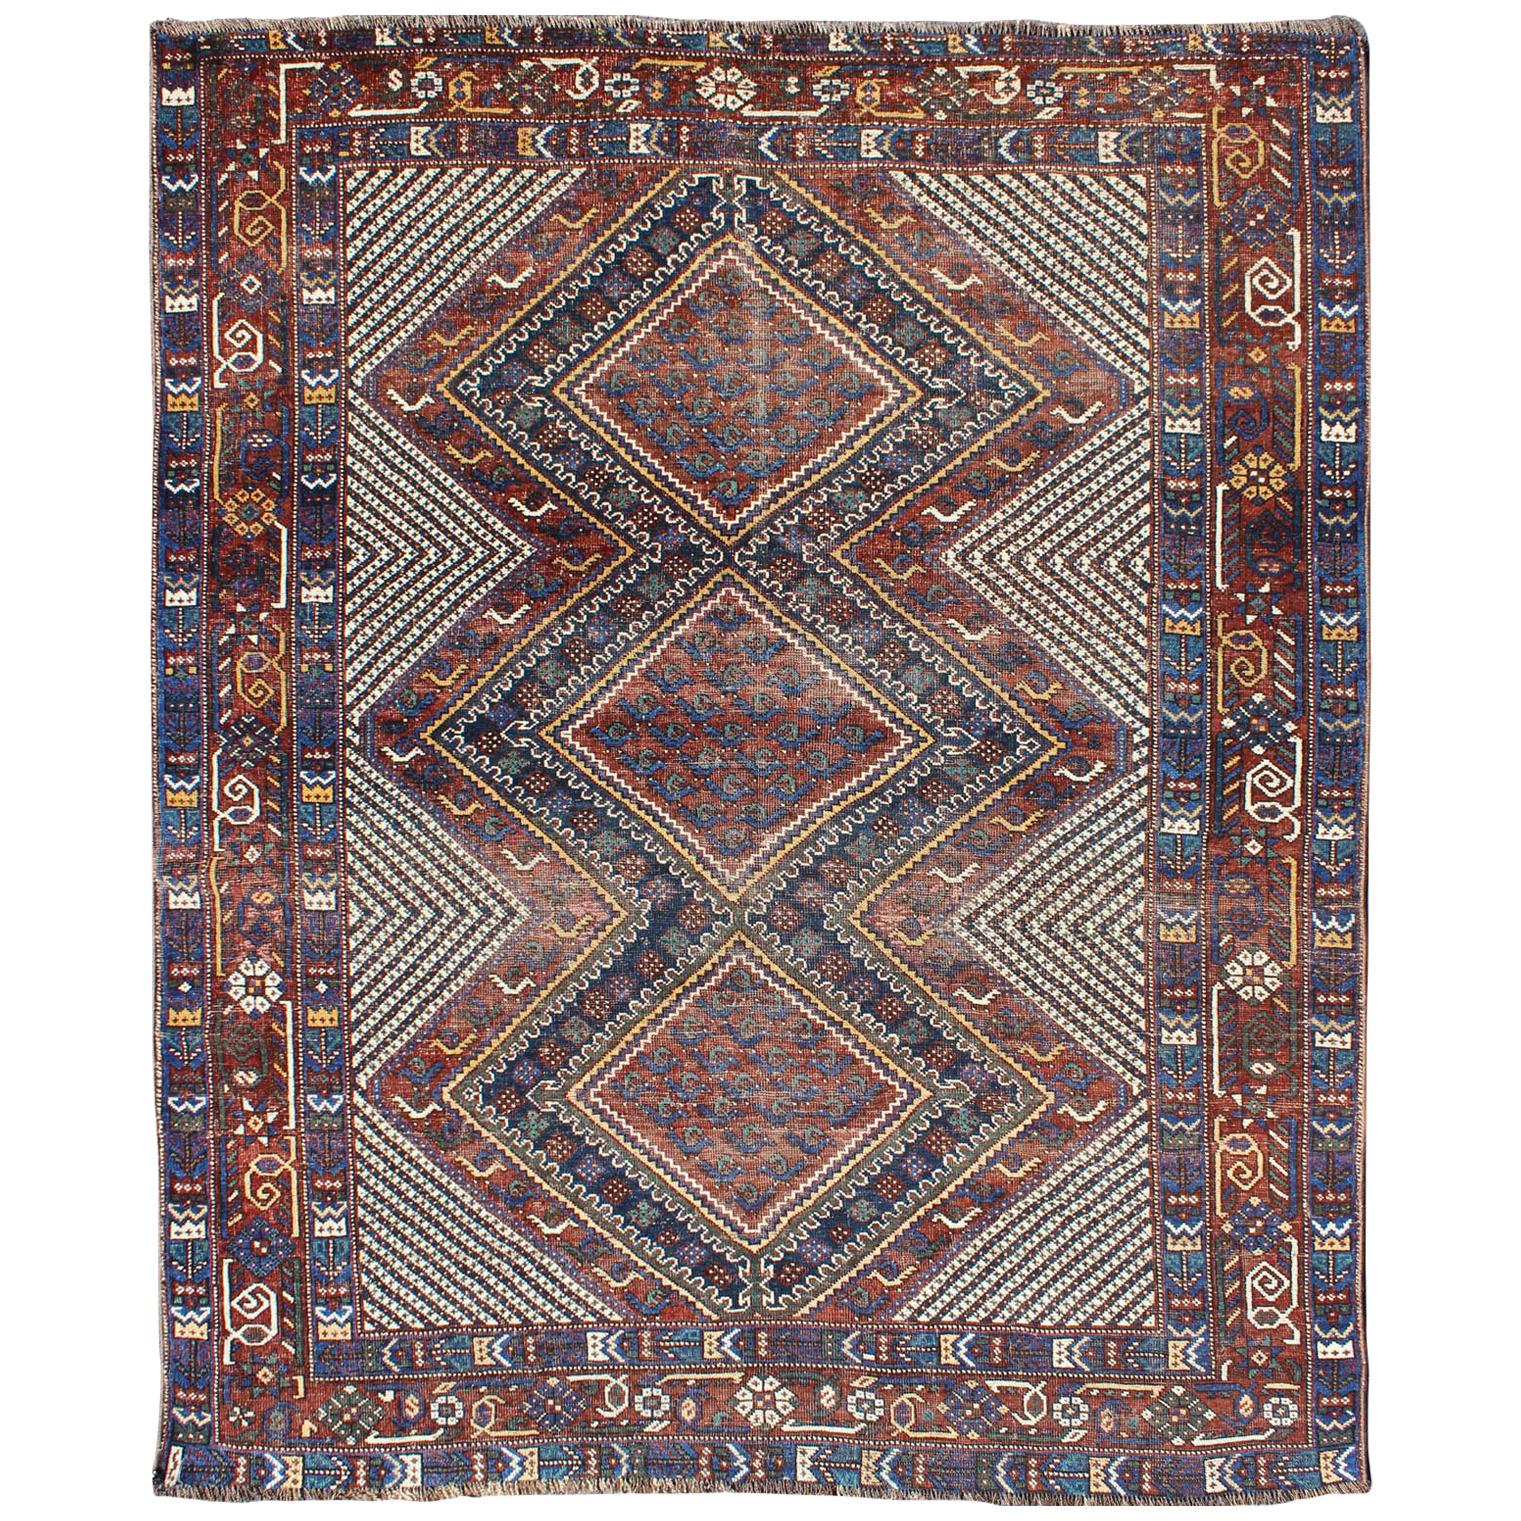 Tri-Medallion Antique Persian Afshar Rug in Colorful Tones of Red, Blue, Green